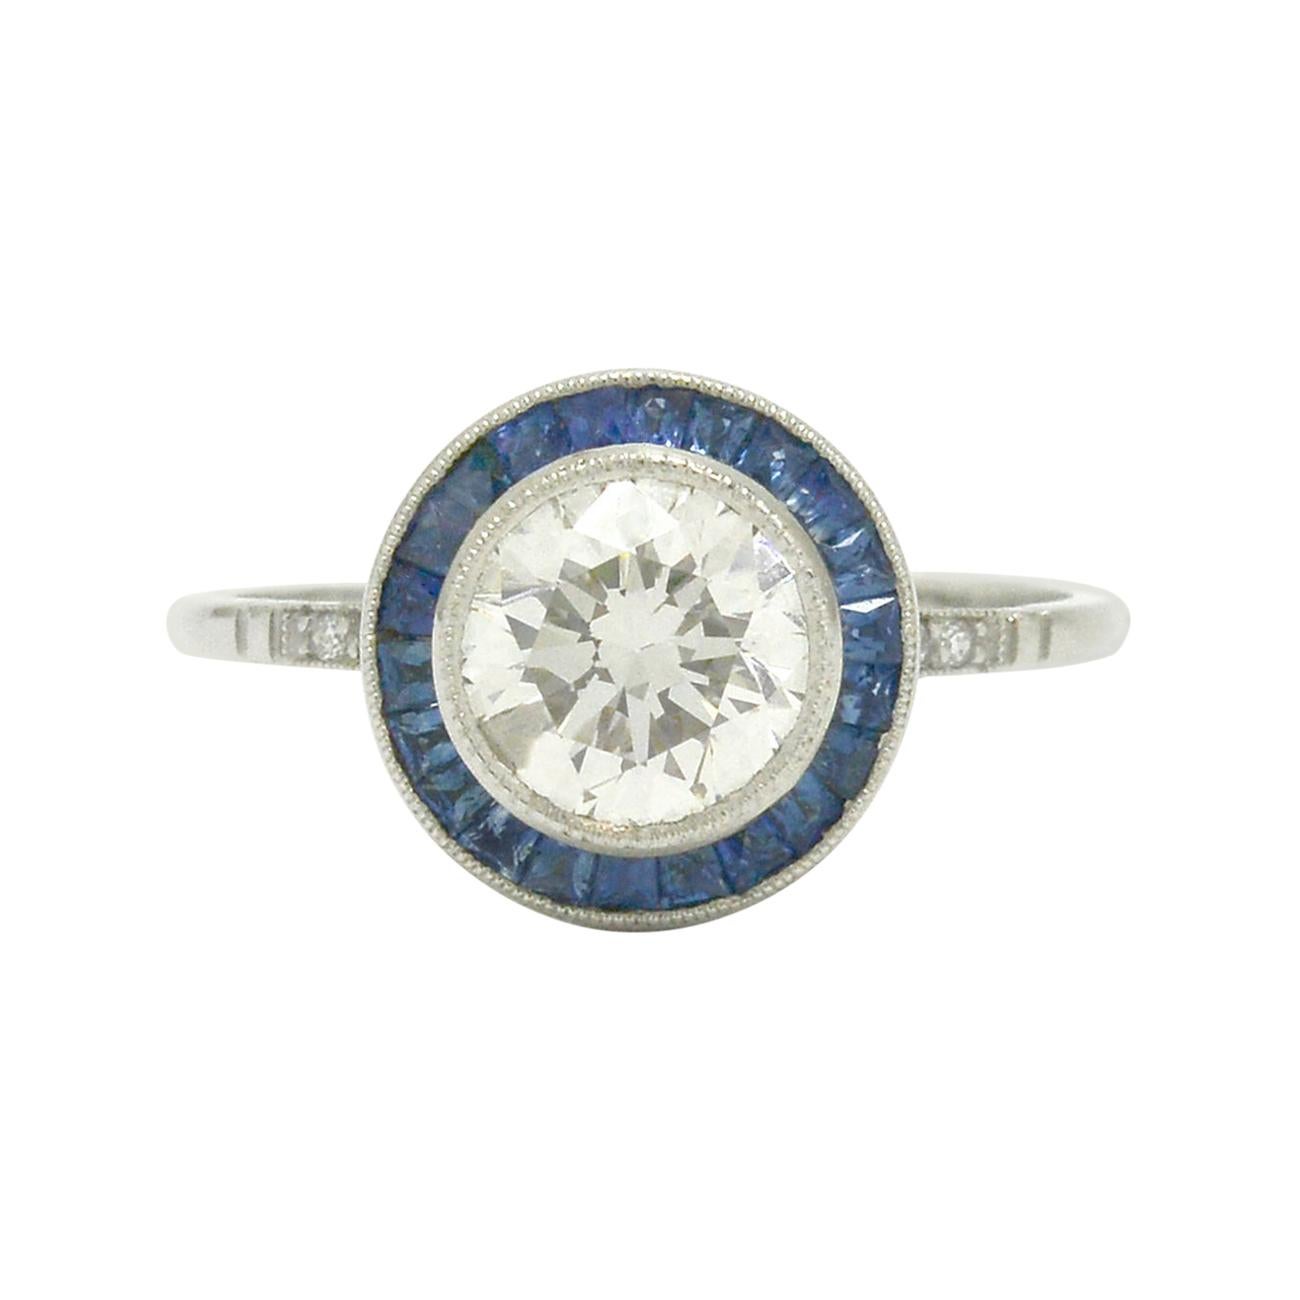 1.50 Ct Round Diamond Engagement Ring Art Deco Style Solitaire Sapphire Halo